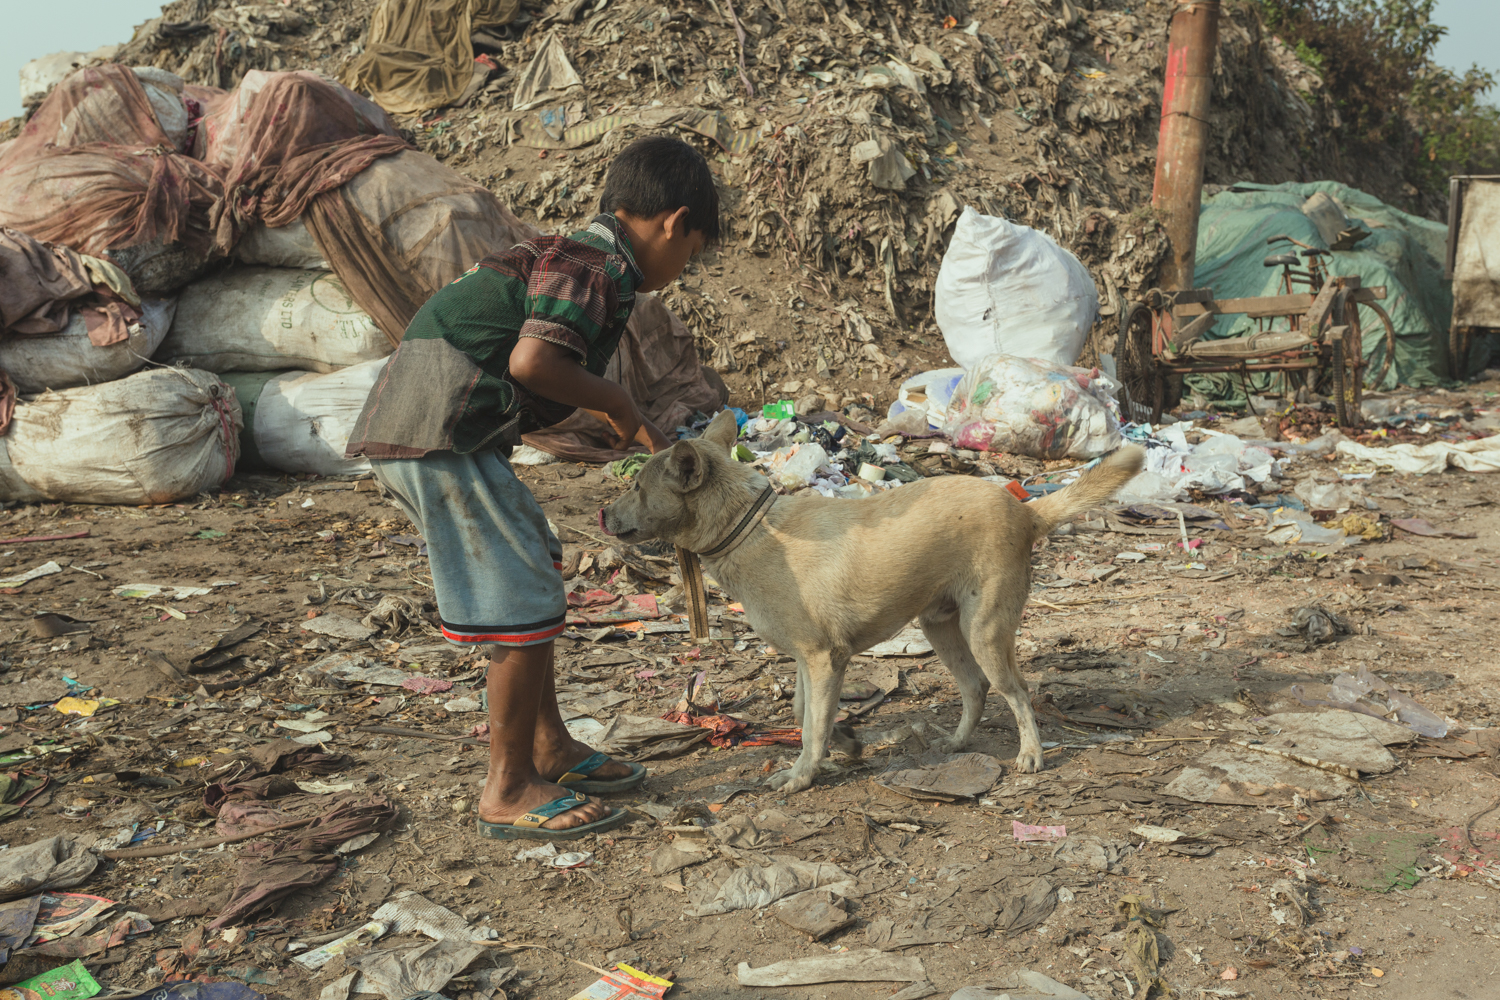 Children of the Chittagong, Bangladesh Waste Picker community caring for pets.